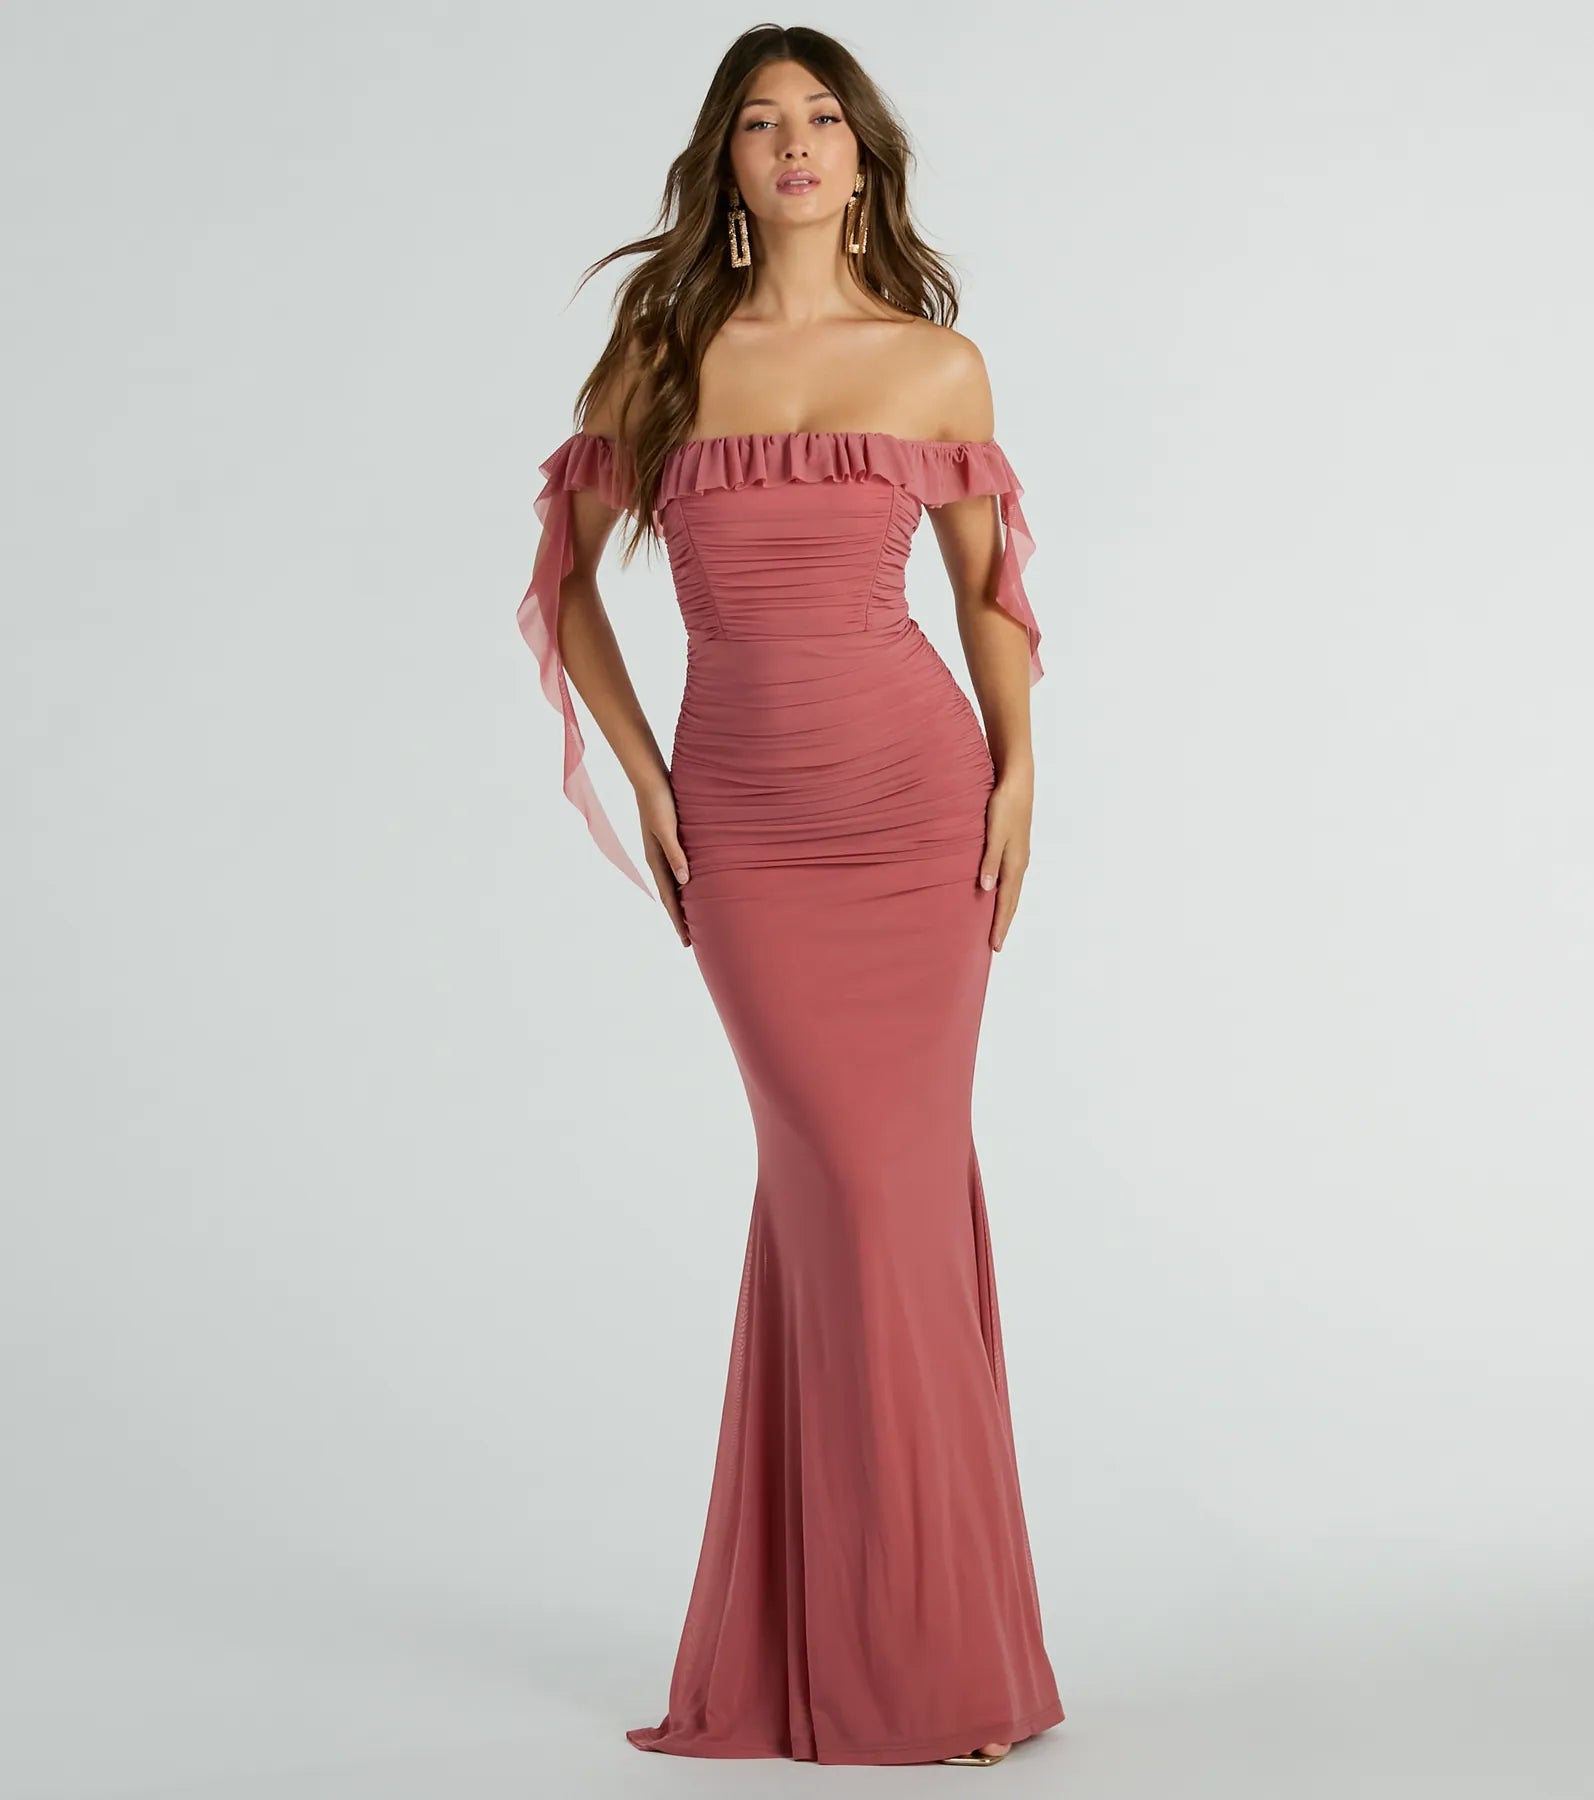 Sexy Sophisticated Knit Ruched Mesh Stretchy Mermaid Off the Shoulder Maxi Dress With Ruffles